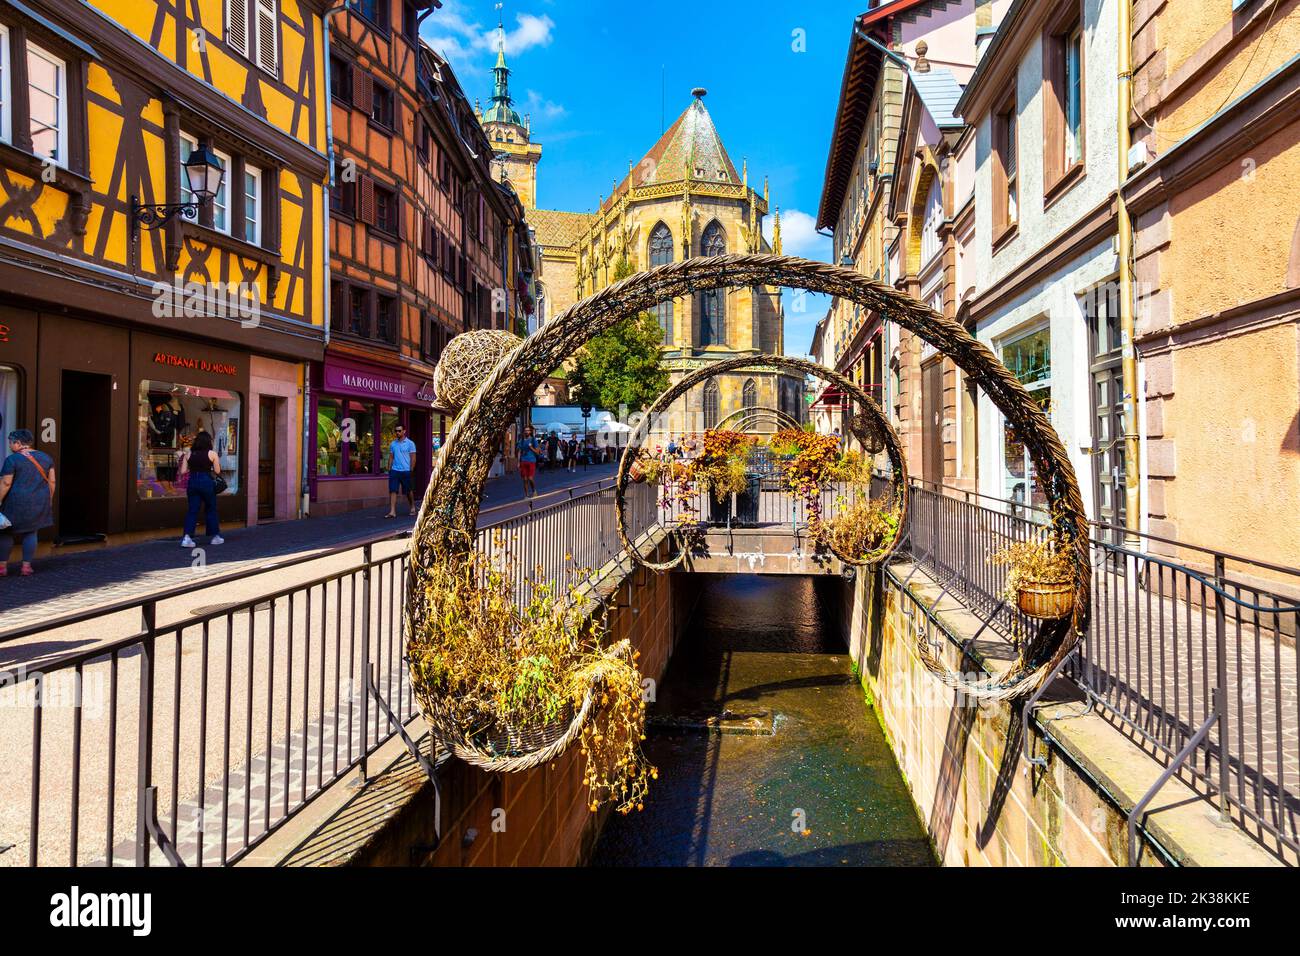 Canal decorated with arches along Rue de l'Église with St Martin's Church in the background, Colmar, Alsace, France Stock Photo